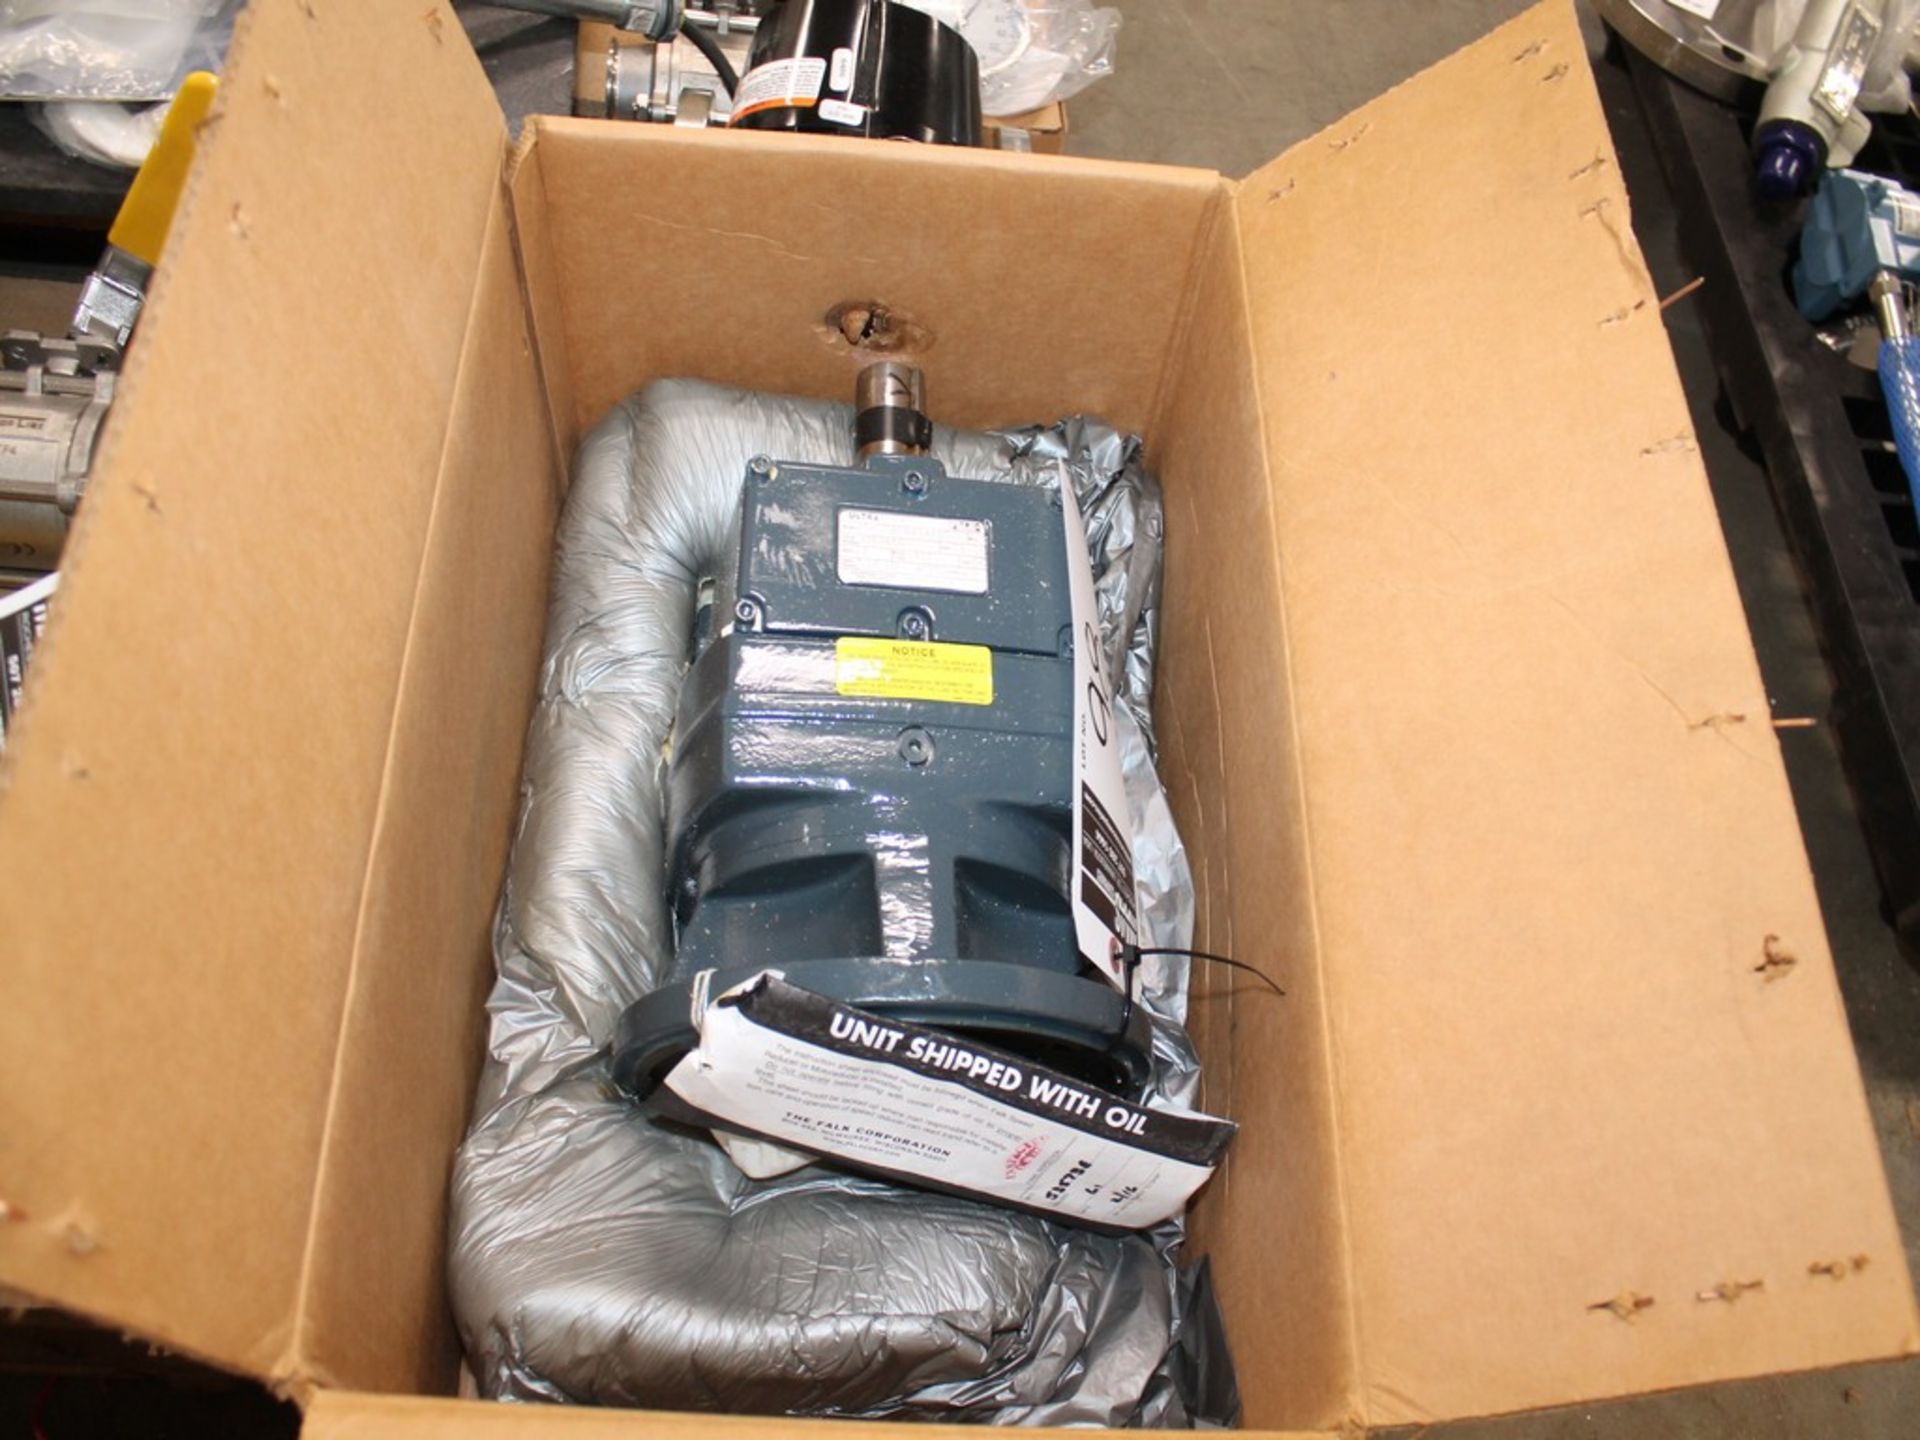 LOT CONTENTS OF PALLET WITH MISCELLANEOUS PUMPS, GAUGES, VALVES, METERS - Image 11 of 12